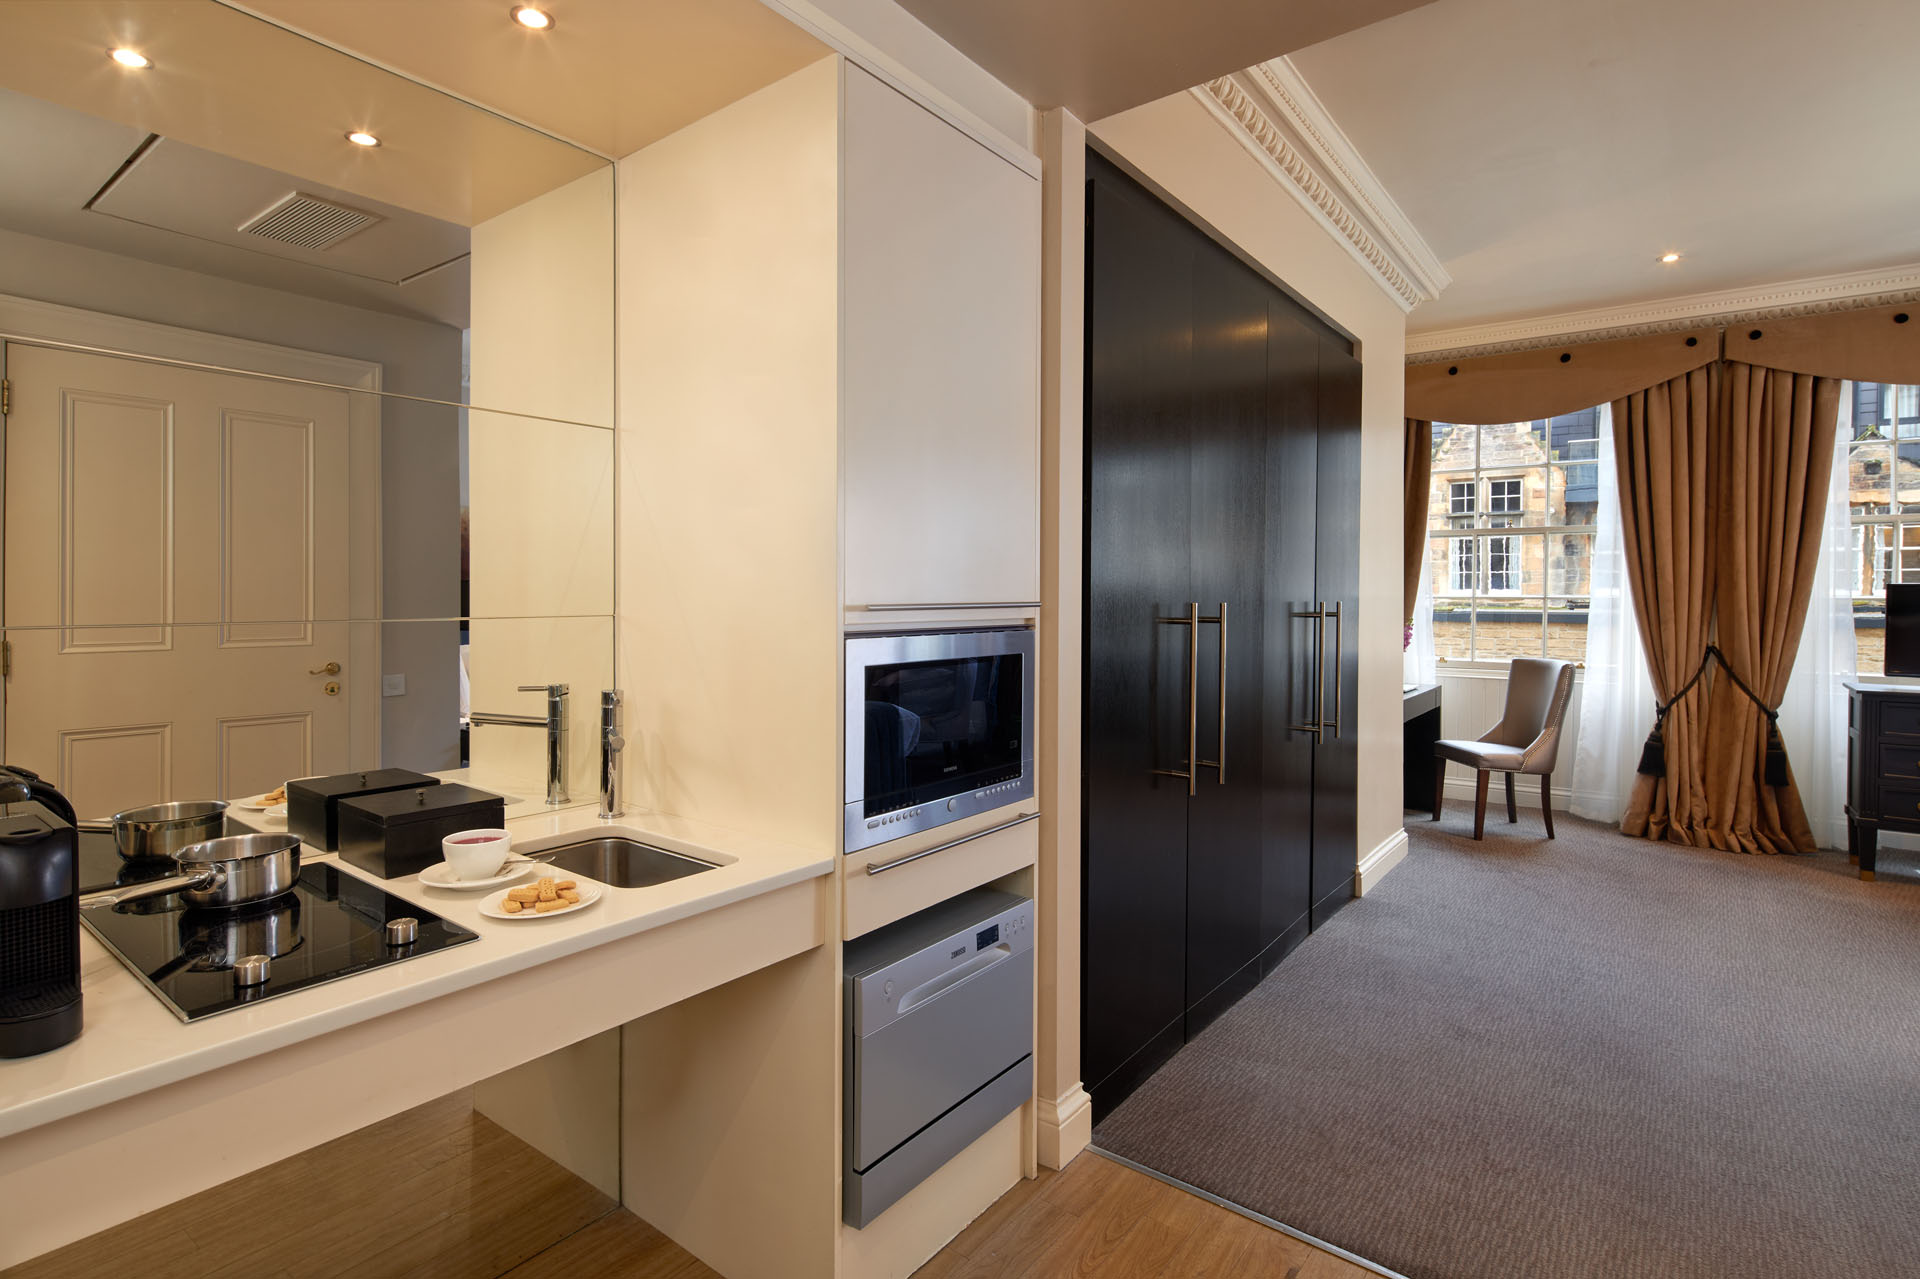 Fully furnished serviced hotel apartment with kitchenette for a long term stay in Edinburgh